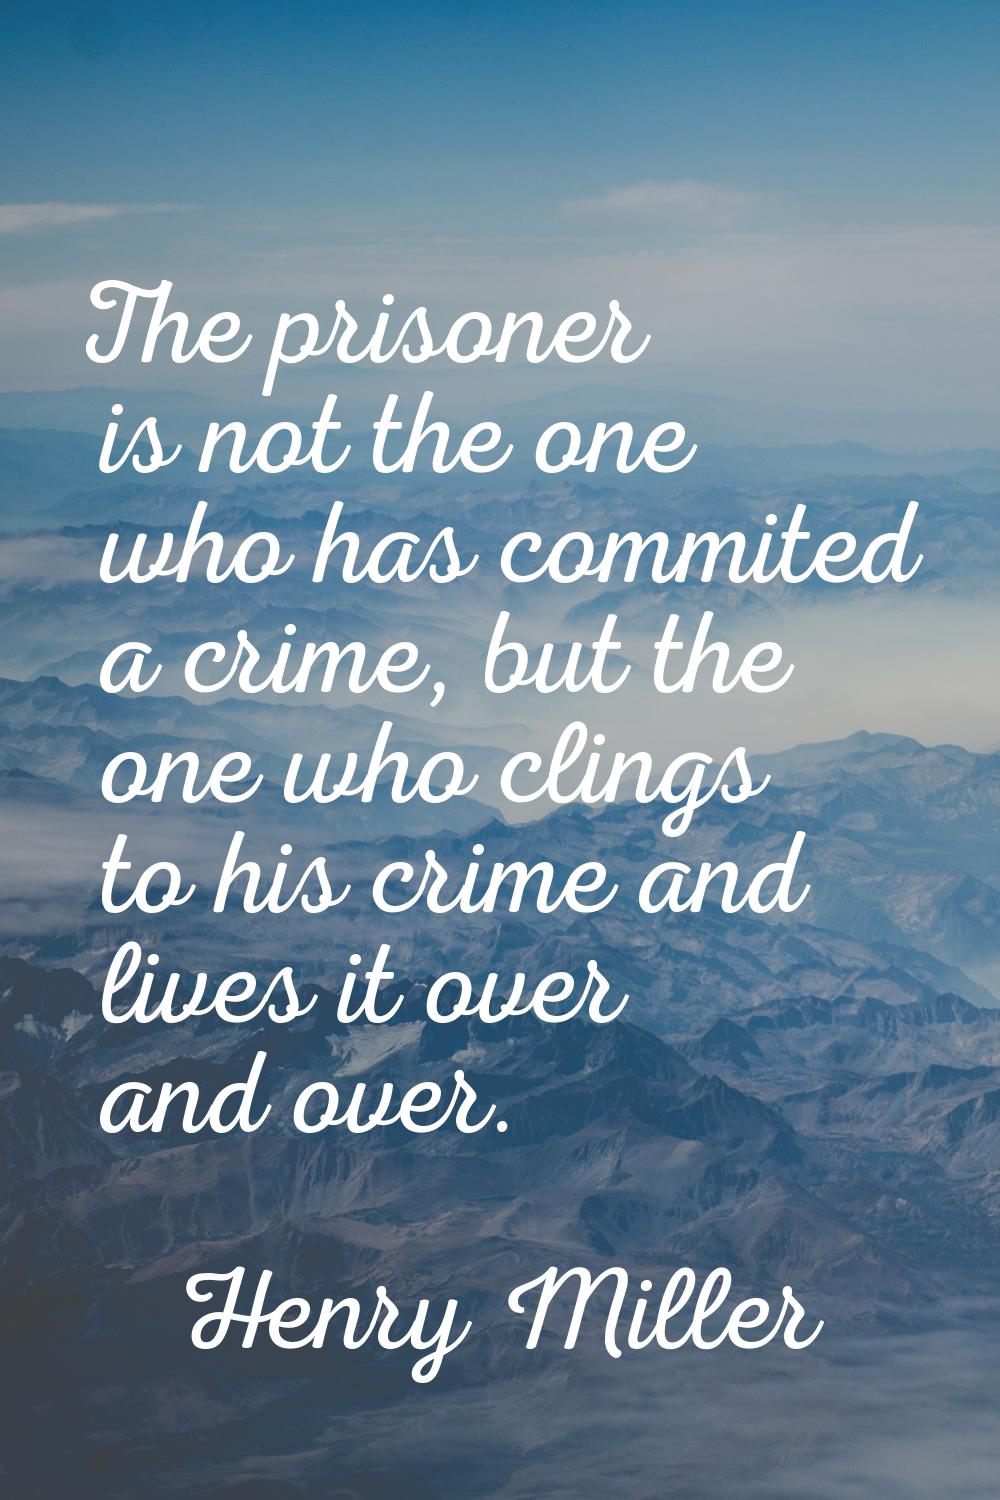 The prisoner is not the one who has commited a crime, but the one who clings to his crime and lives